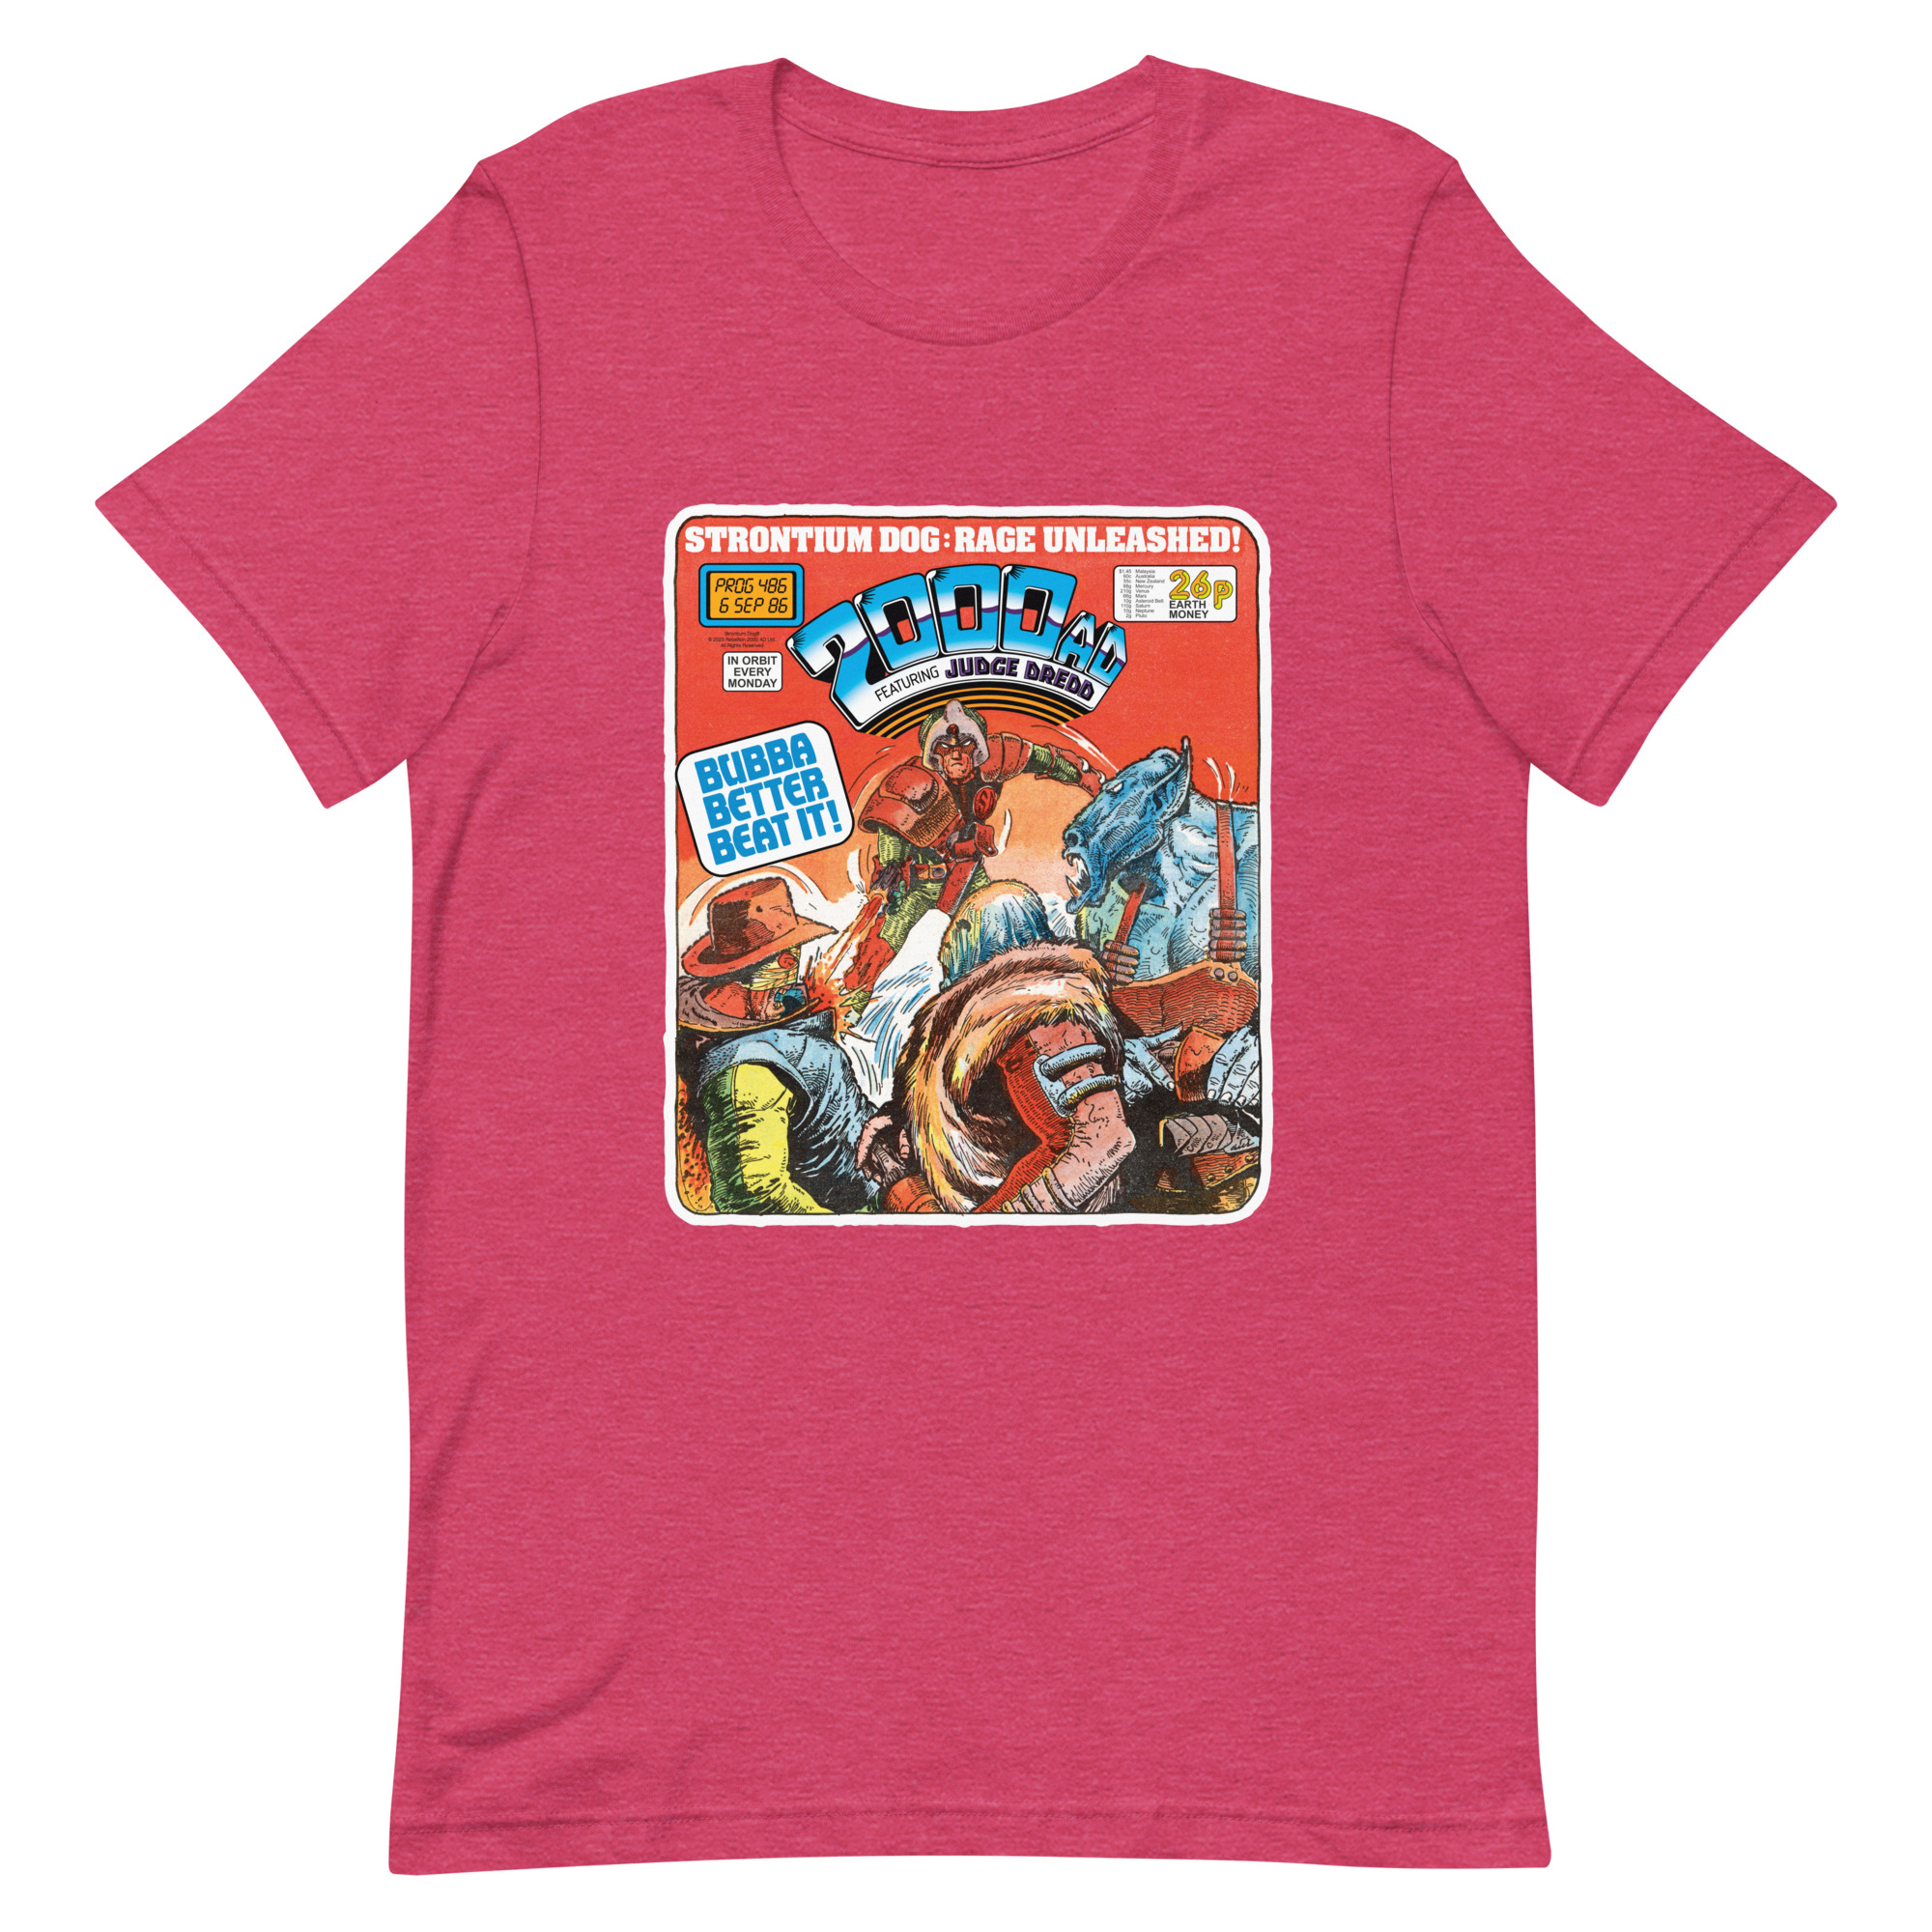 Dark Pink Tshirt with a 'Classic' 2000 AD Cover image on the chest. In the image Strontium Dog faces off against three alien ruffians.